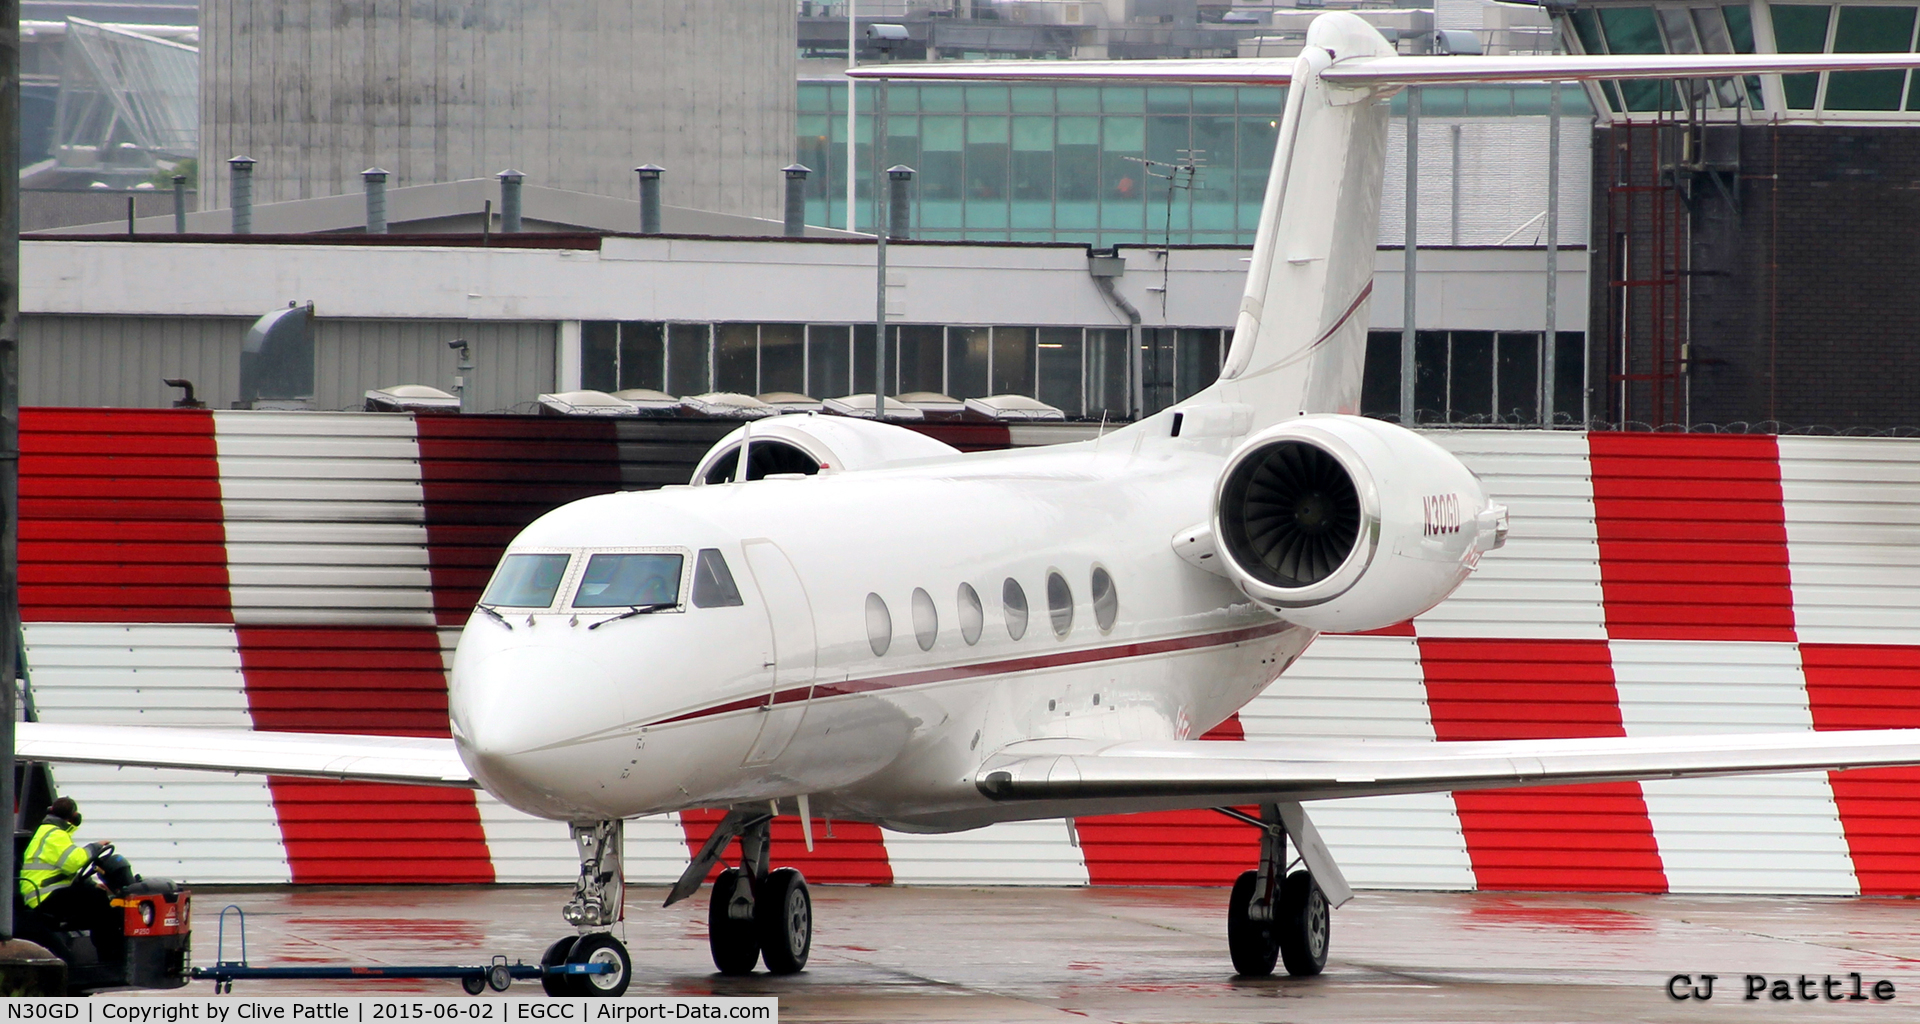 N30GD, Gulfstream Aerospace G-IV C/N 1228, In action at Manchester Airport EGCC